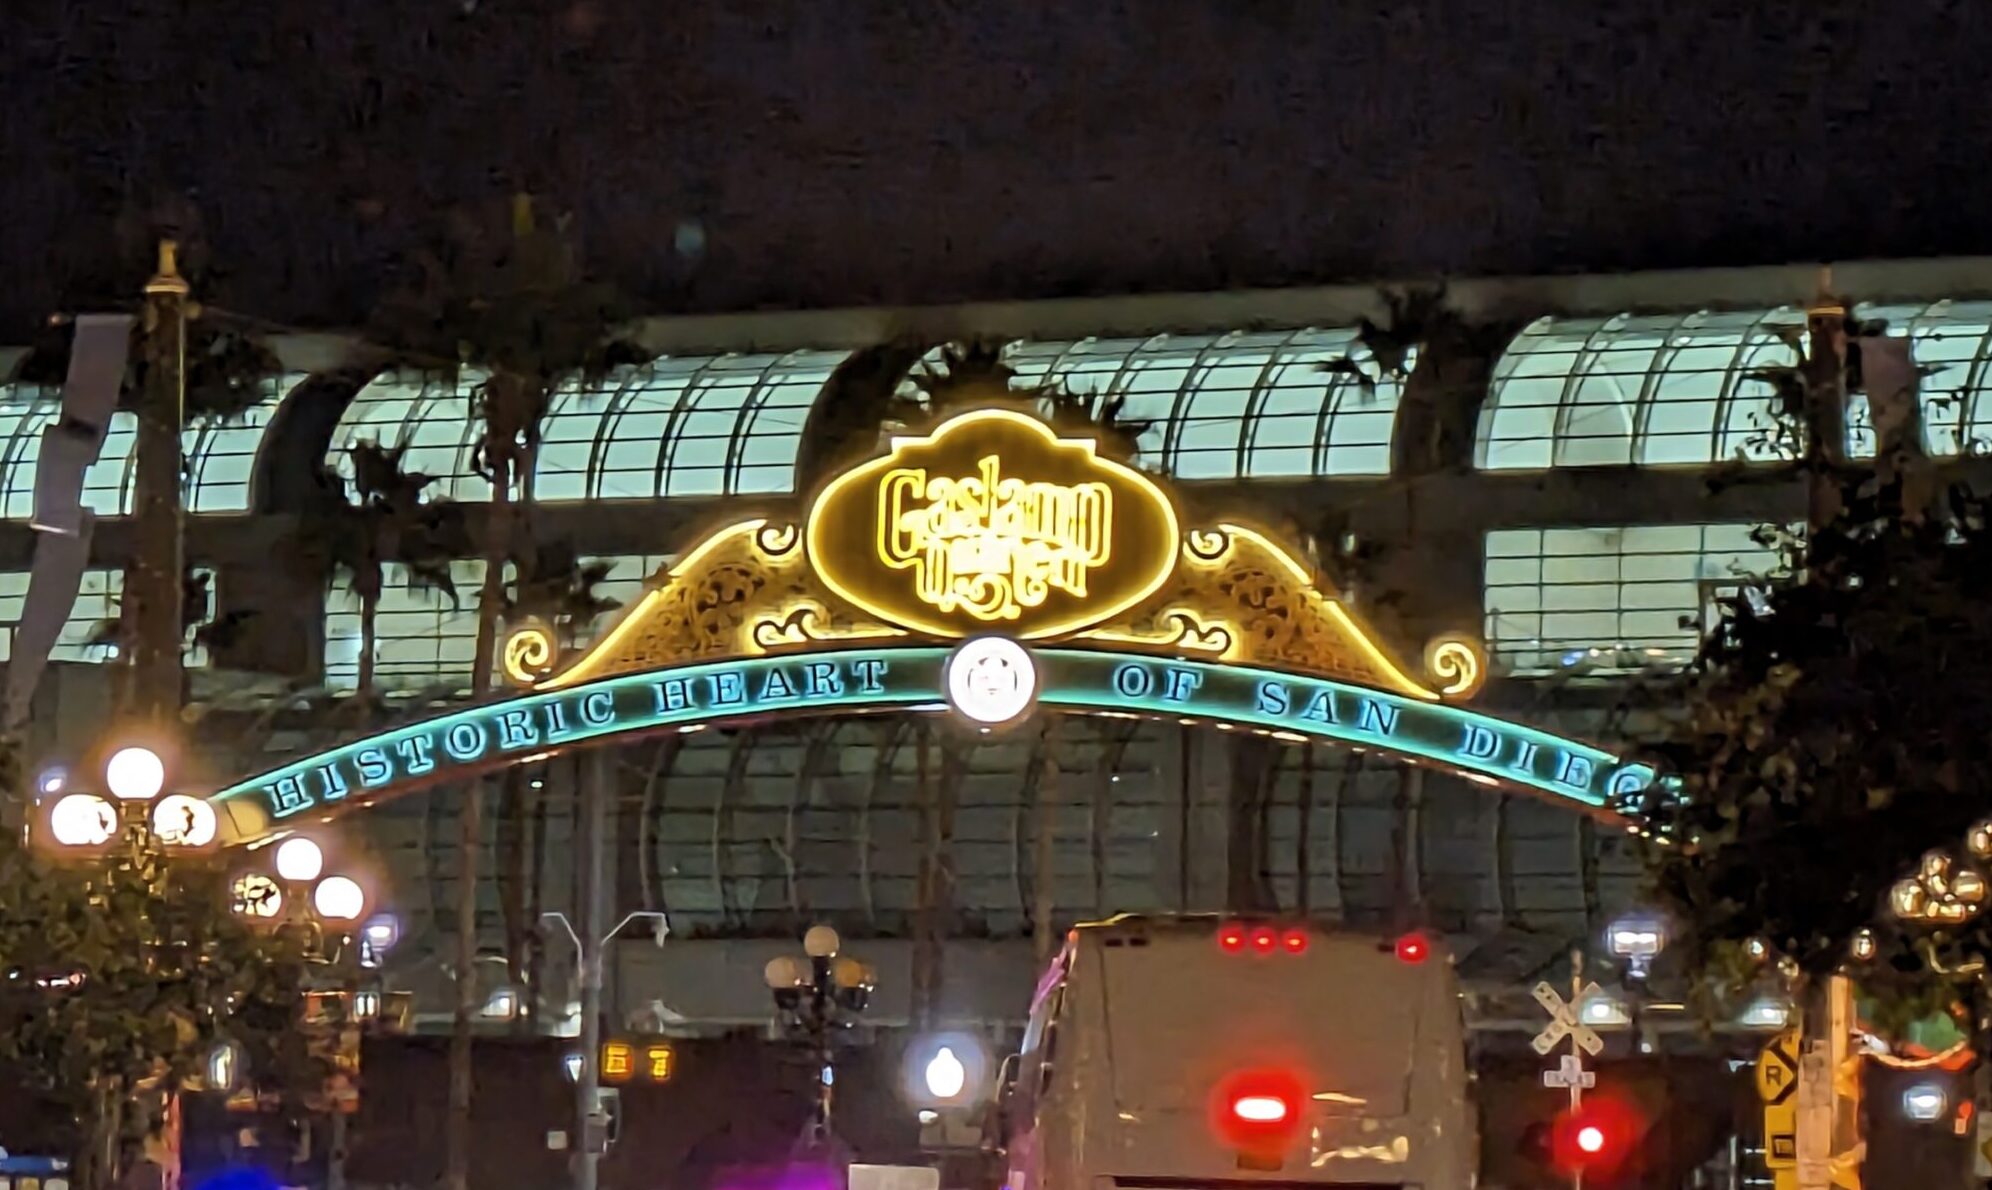 Picture of GasLamp district sign in San Diego lit up at night.